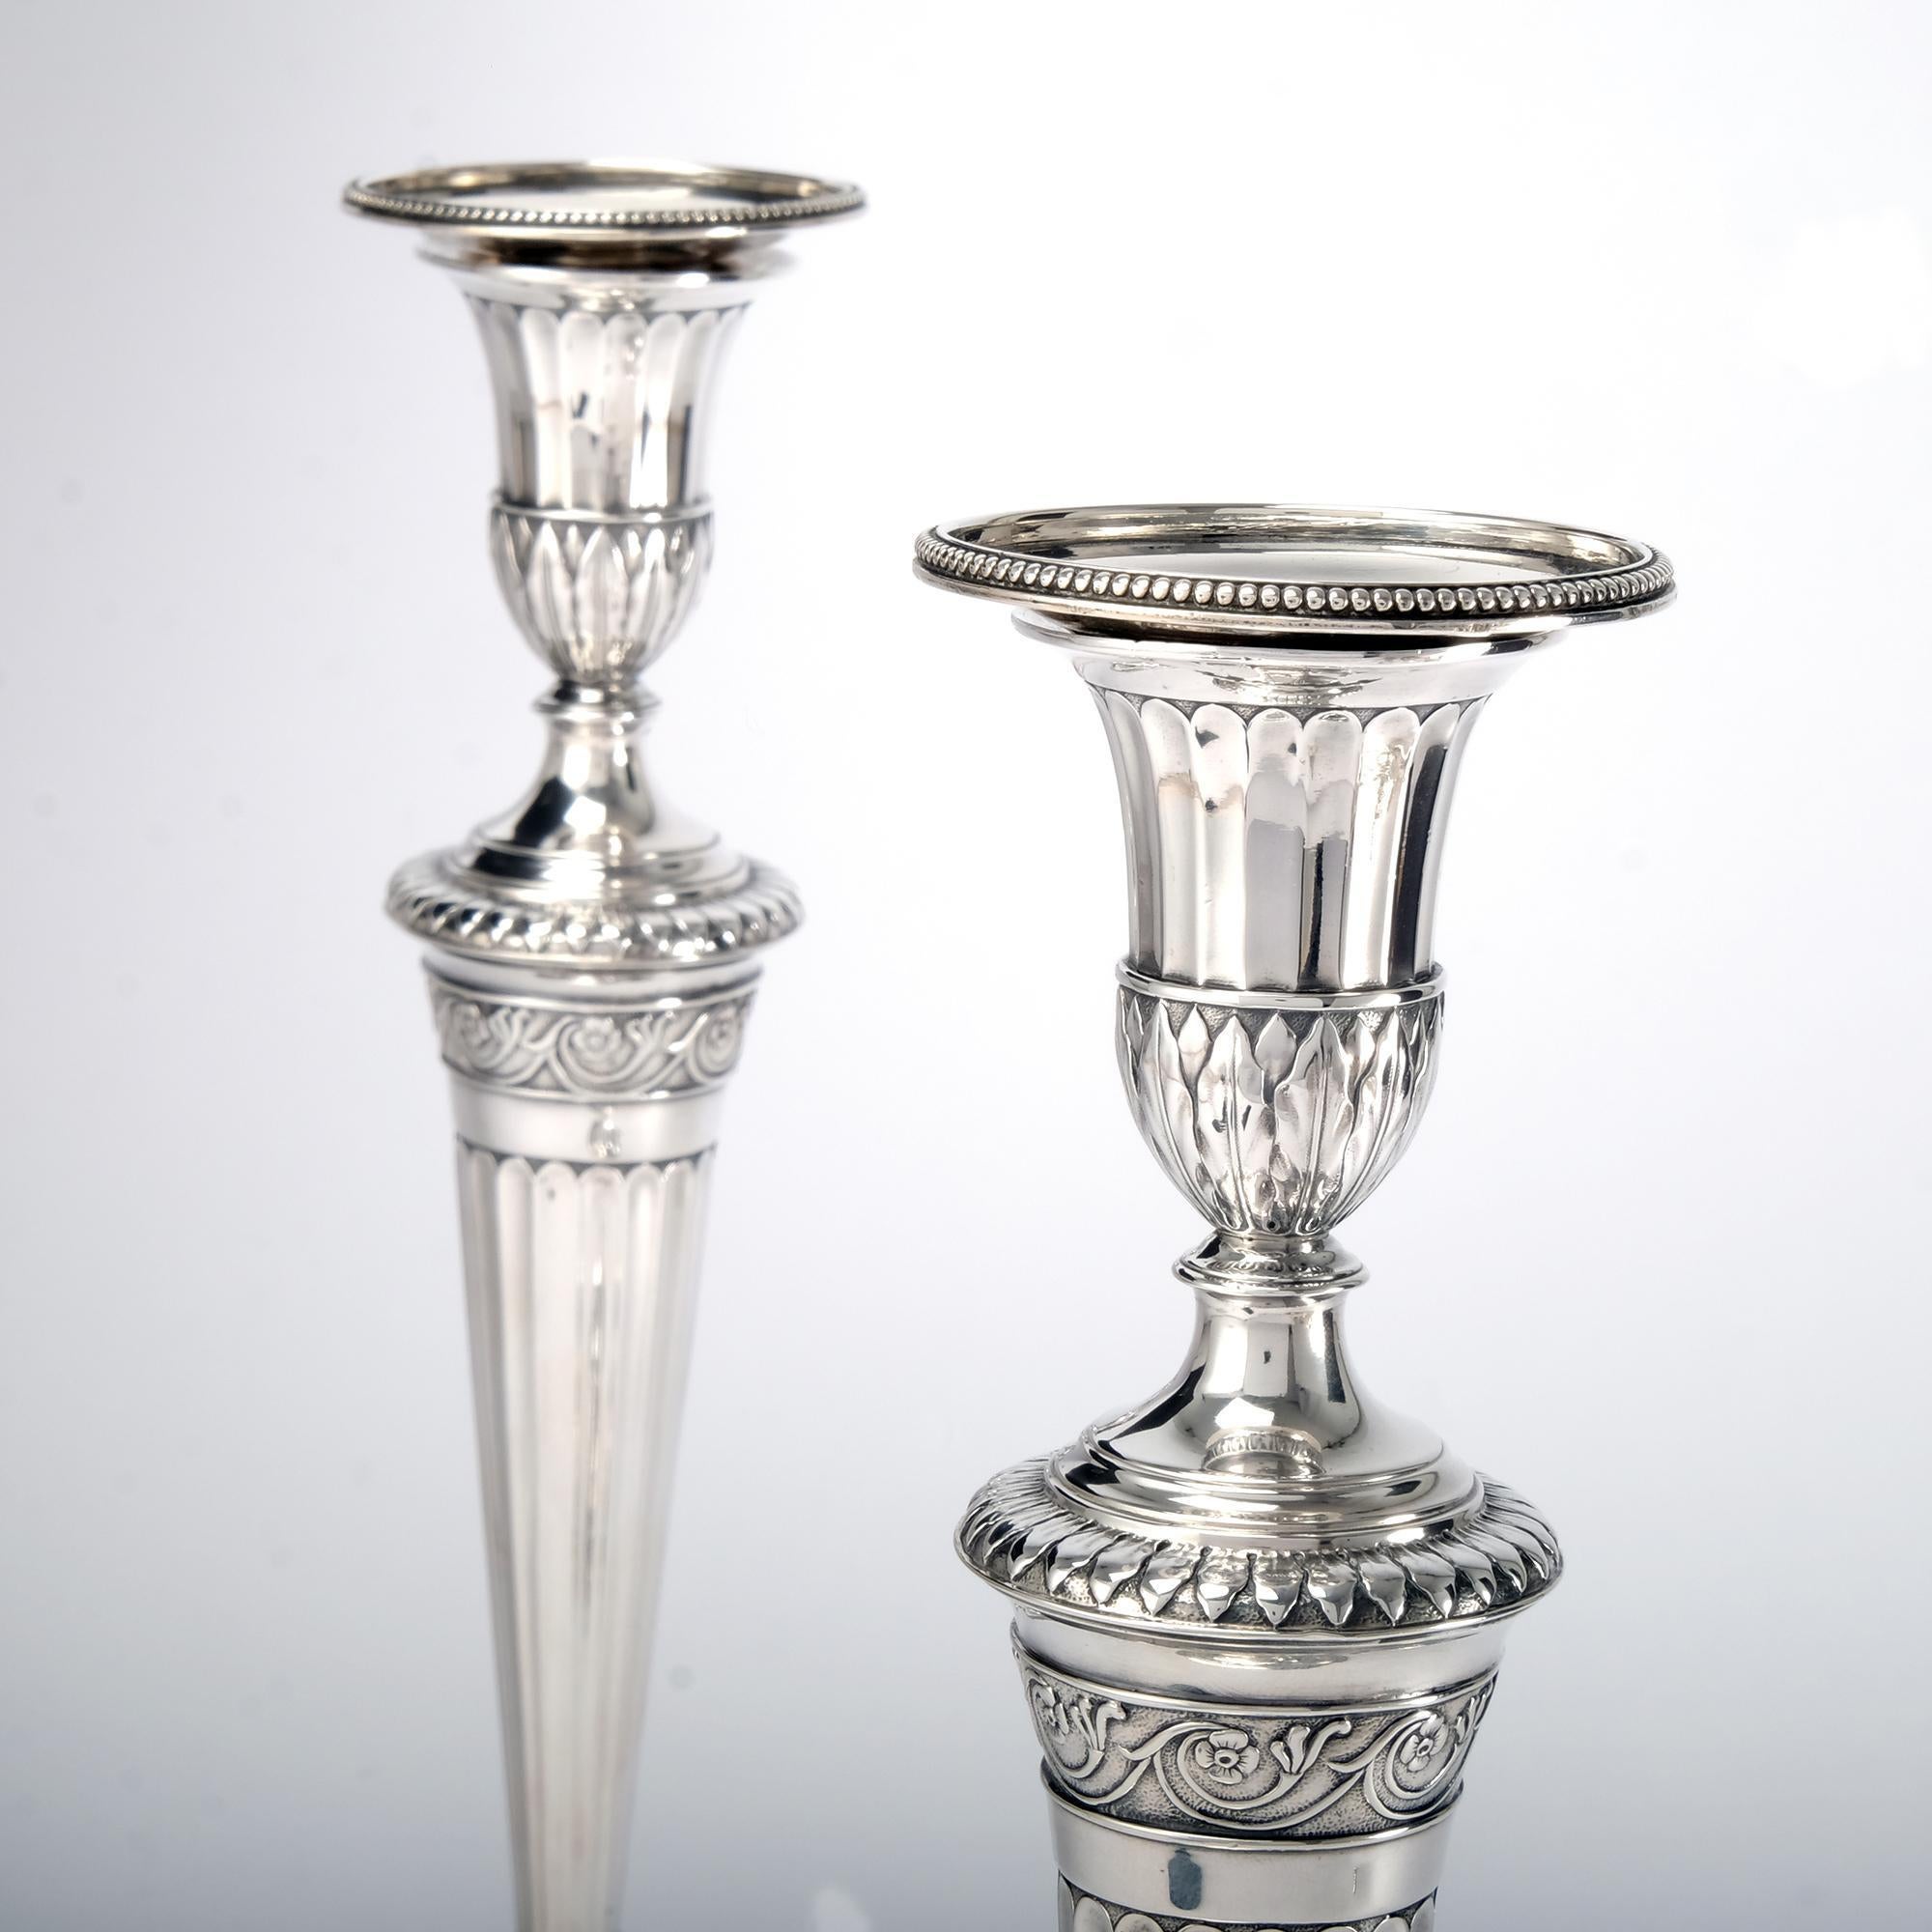 English Pair of George III Silver Candlesticks